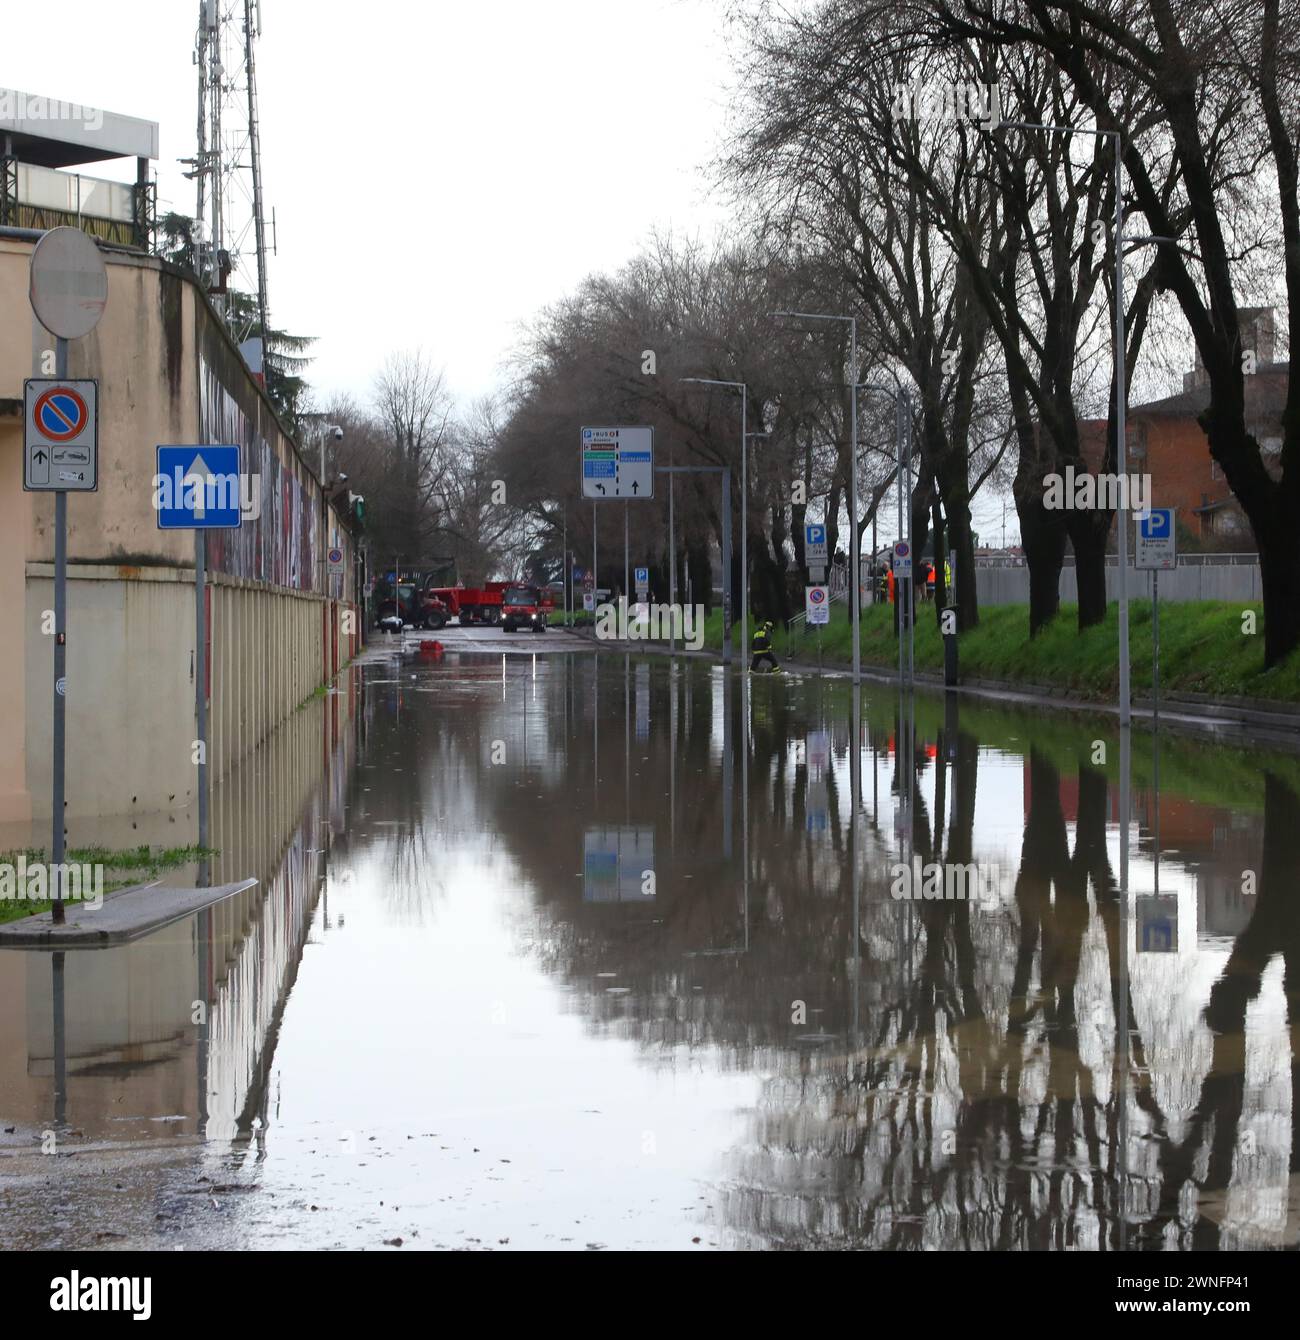 street of the city flooded after the flooding of the river due to the torrential rain and the ancient sewage system Stock Photo